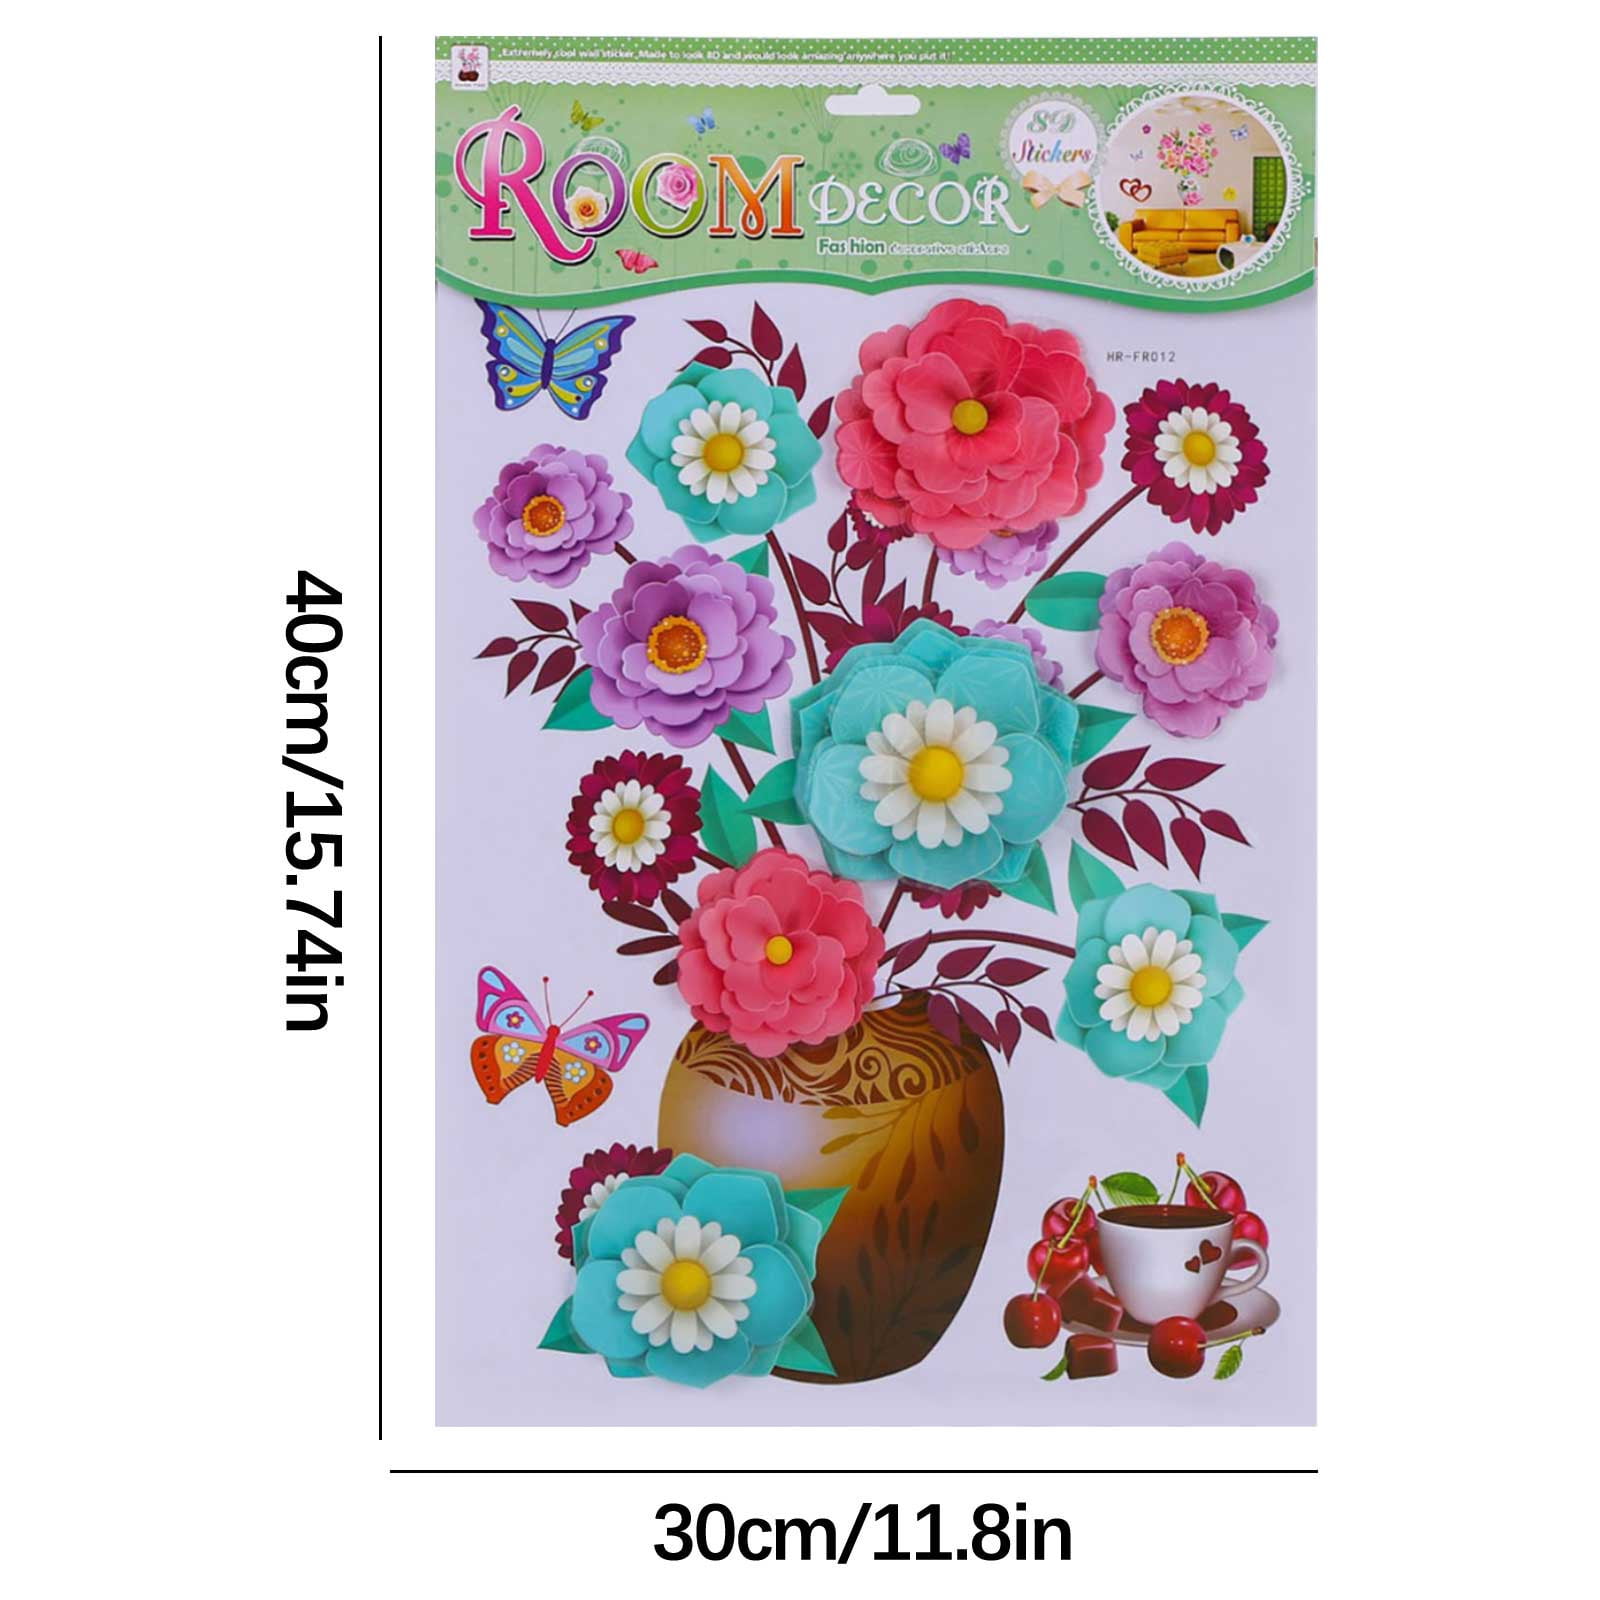 Incraftables Self Adhesive Flower Stickers for Kids (80pcs). Natural Flower Stickers for Crafts